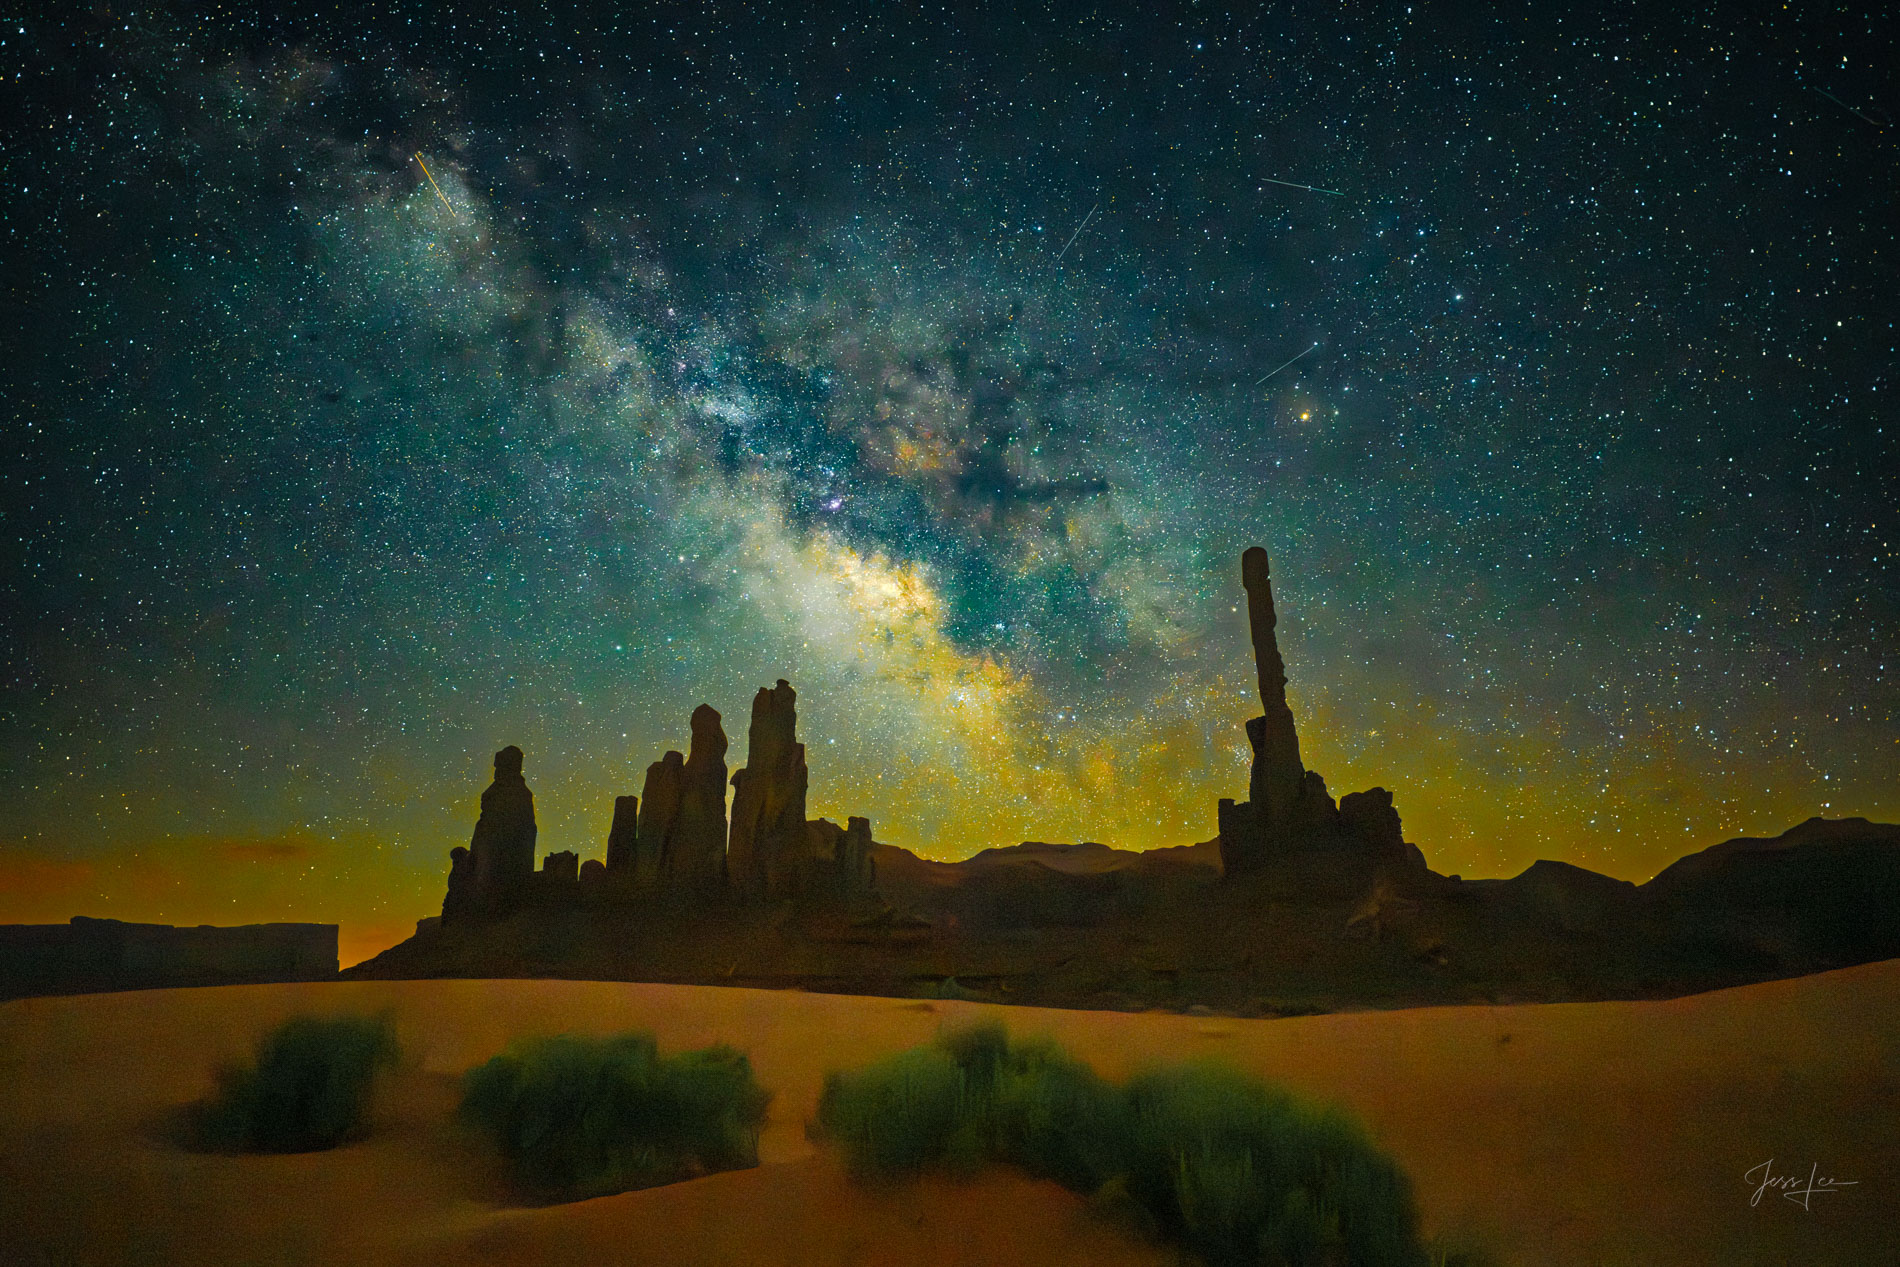 The Milky Way and the Monument Valley Totem Pole at night image is one of the most beautiful scenes rarely photographed in any...